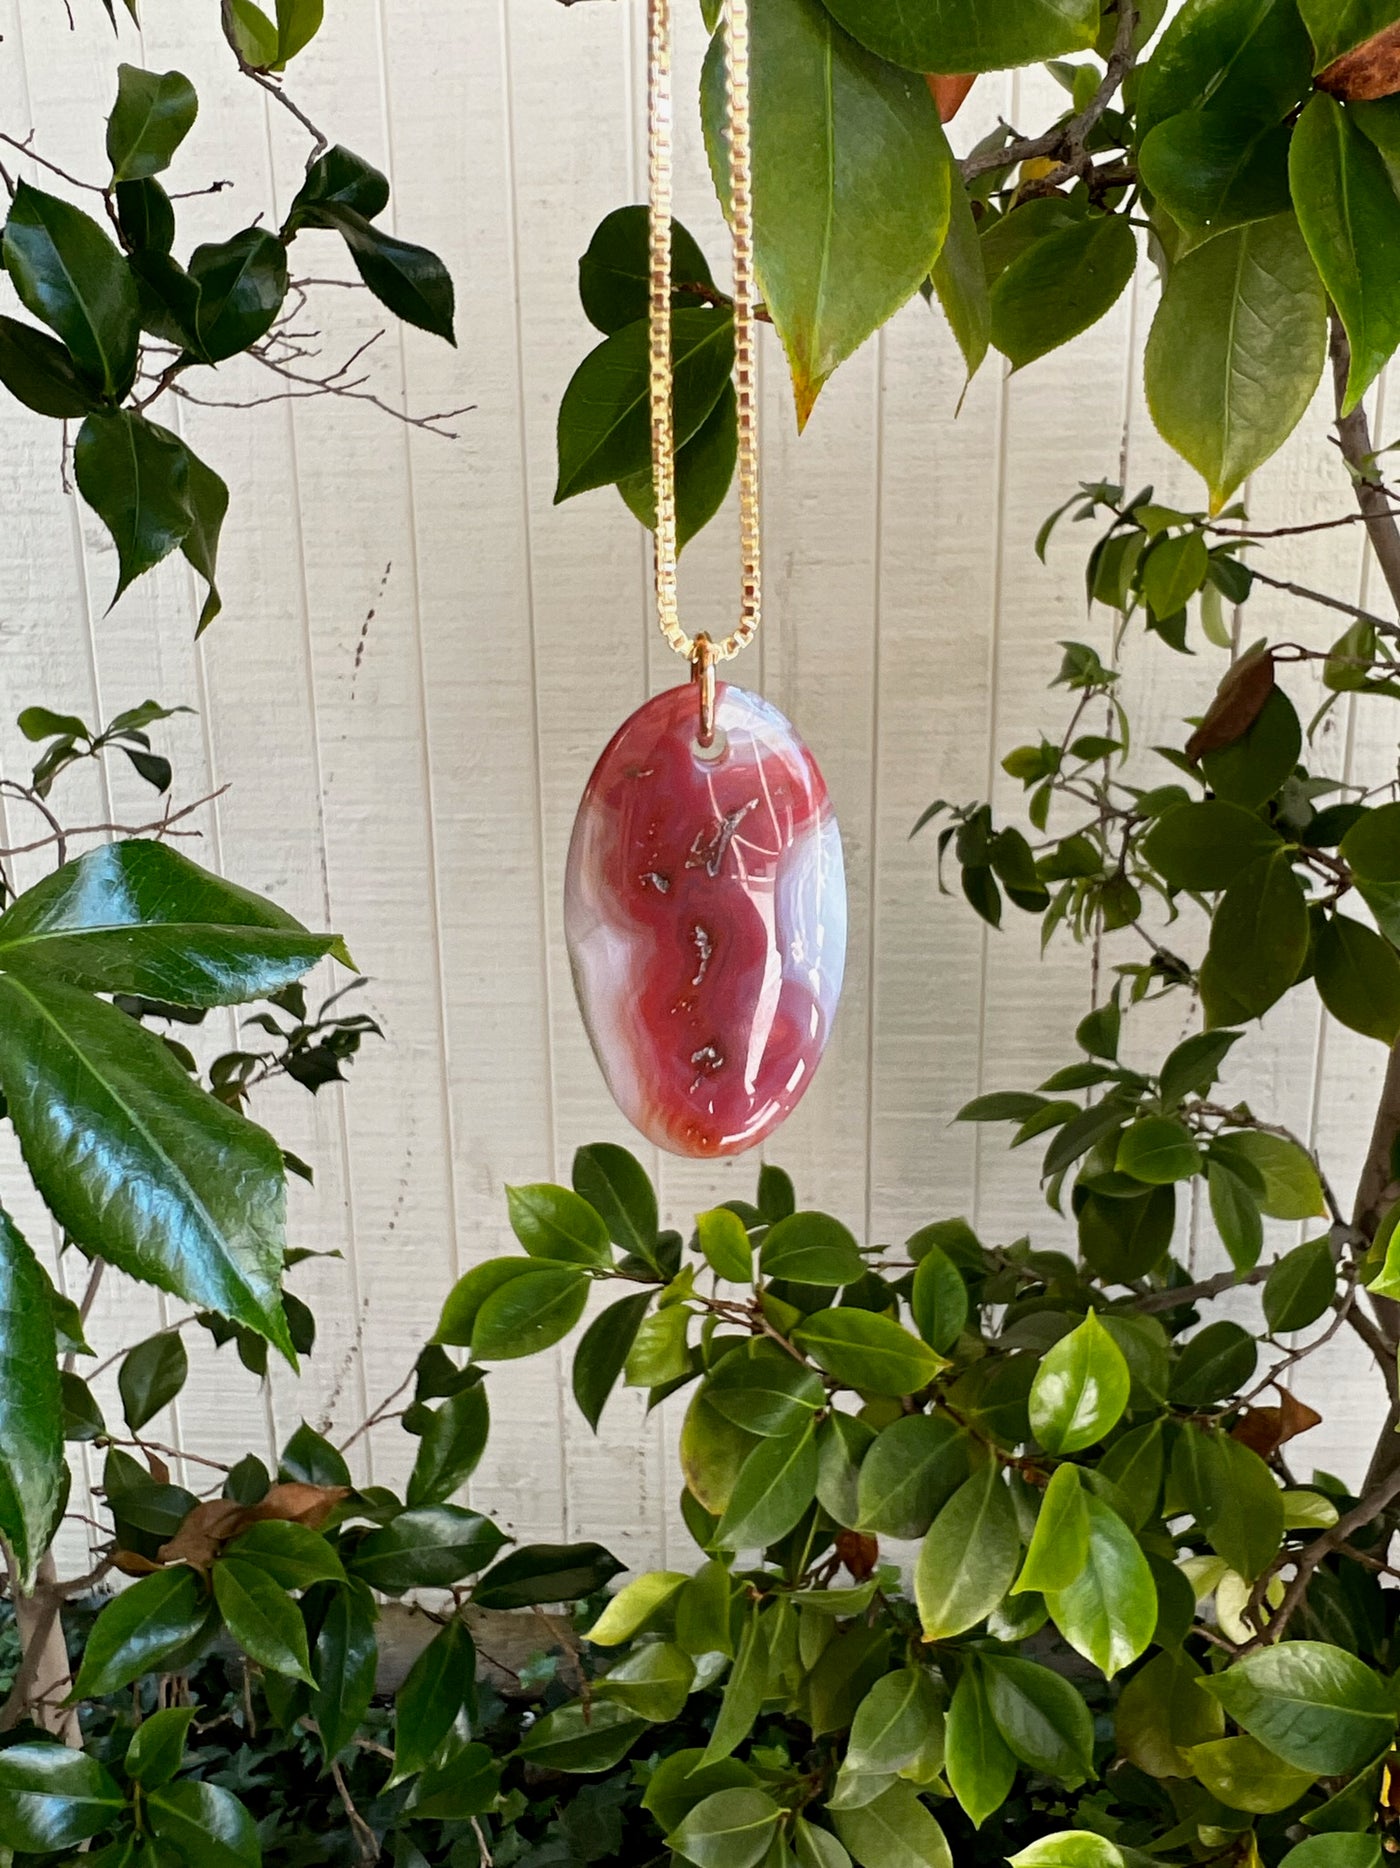 Banded Agate Pendant